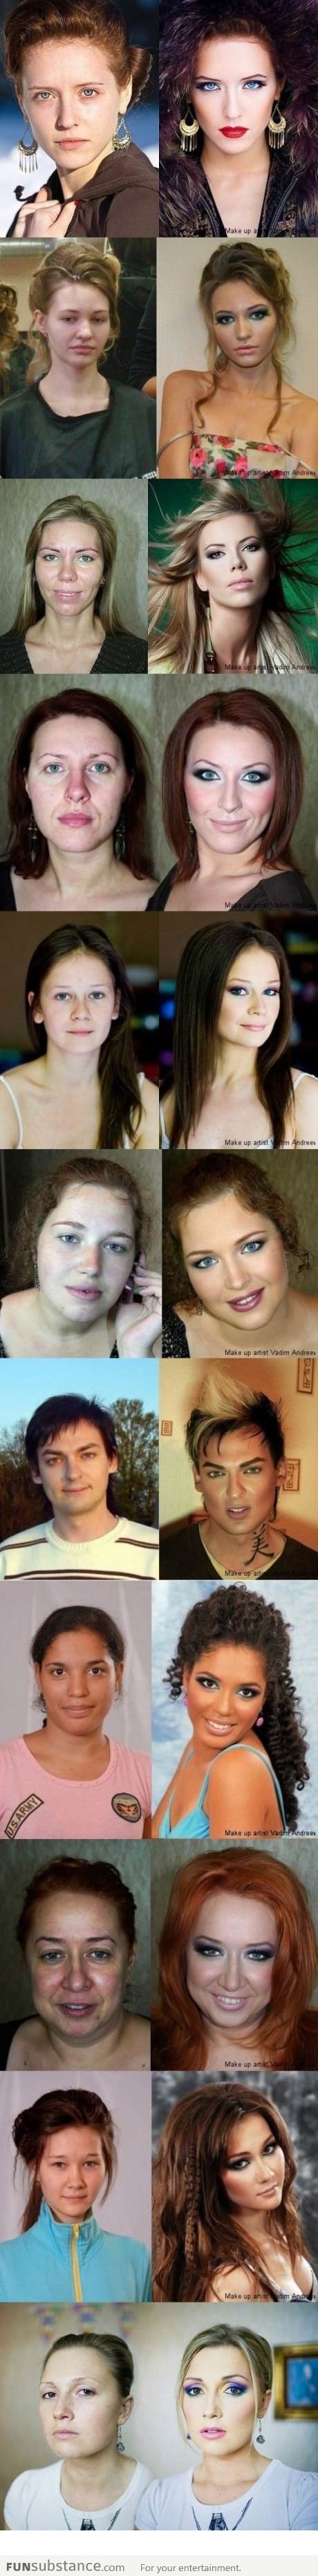 Mother of make-up